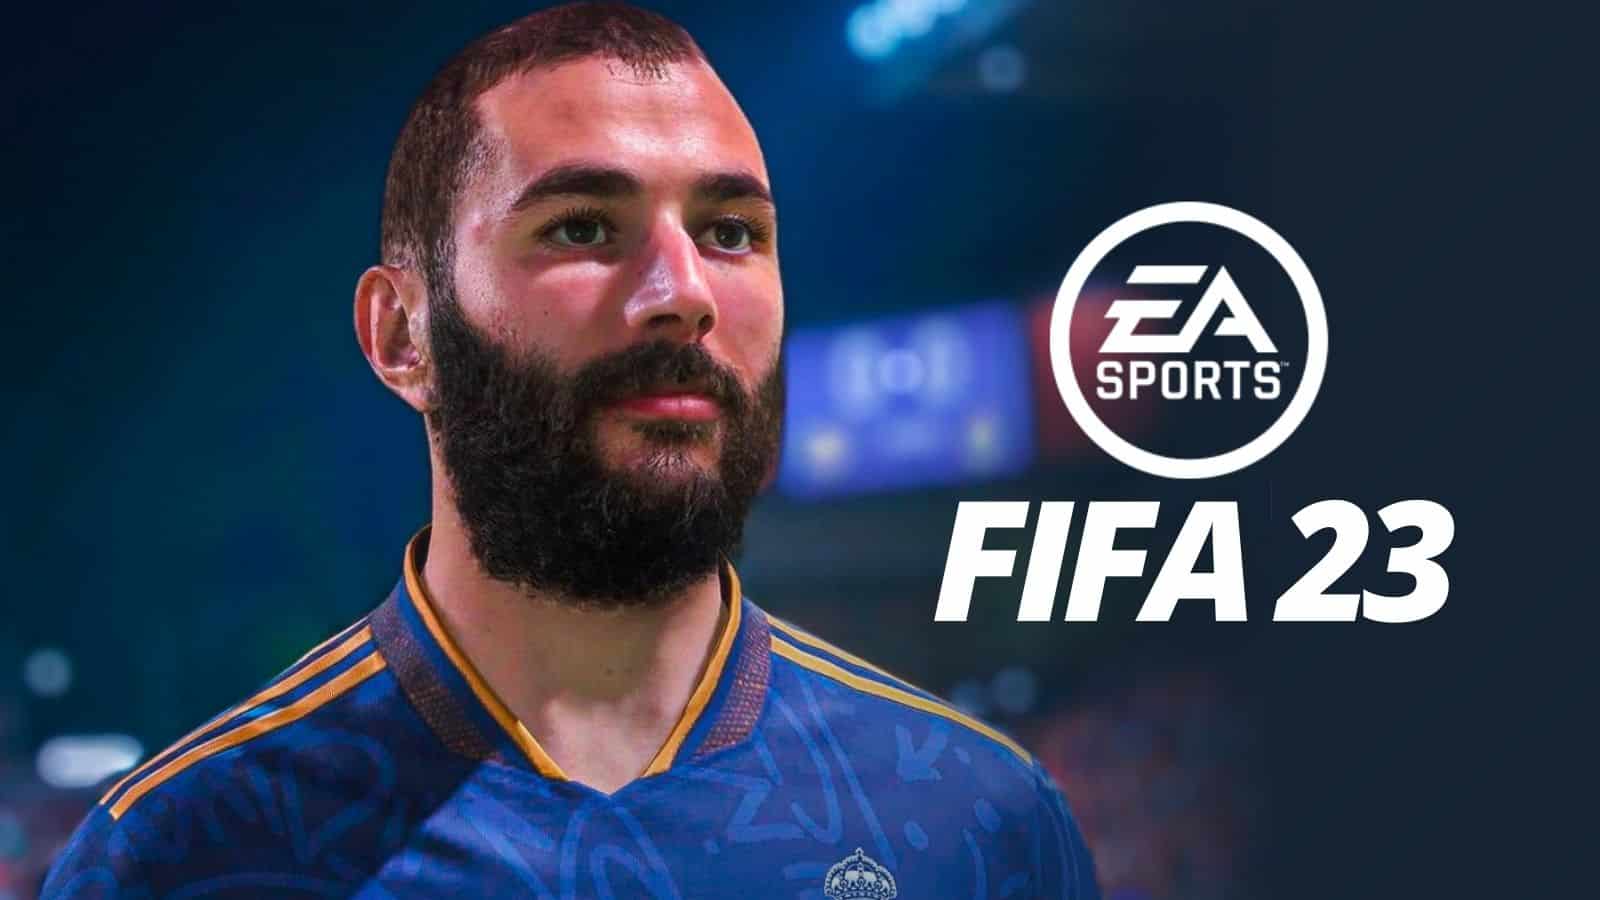 Sony PlayStation 4 EA SPORTS FIFA 23 PS4 Game Deals for Platform